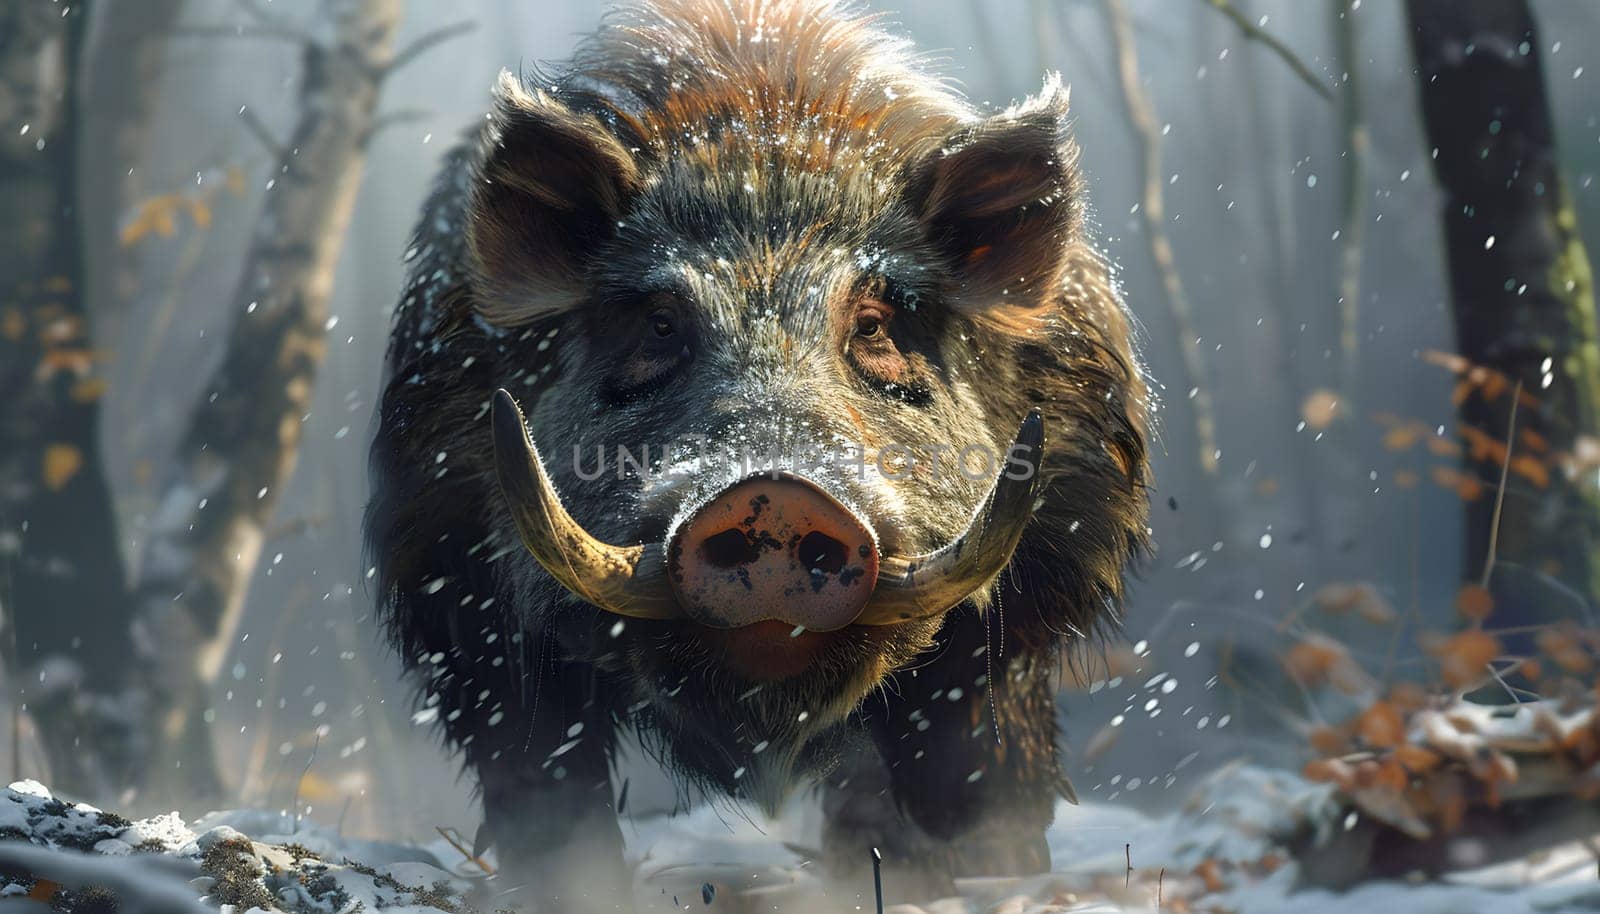 A carnivorous terrestrial animal, the wild boar, with furcovered body and powerful jaw equipped with sharp fangs, is sprinting through a snowy forest landscape among other wildlife organisms